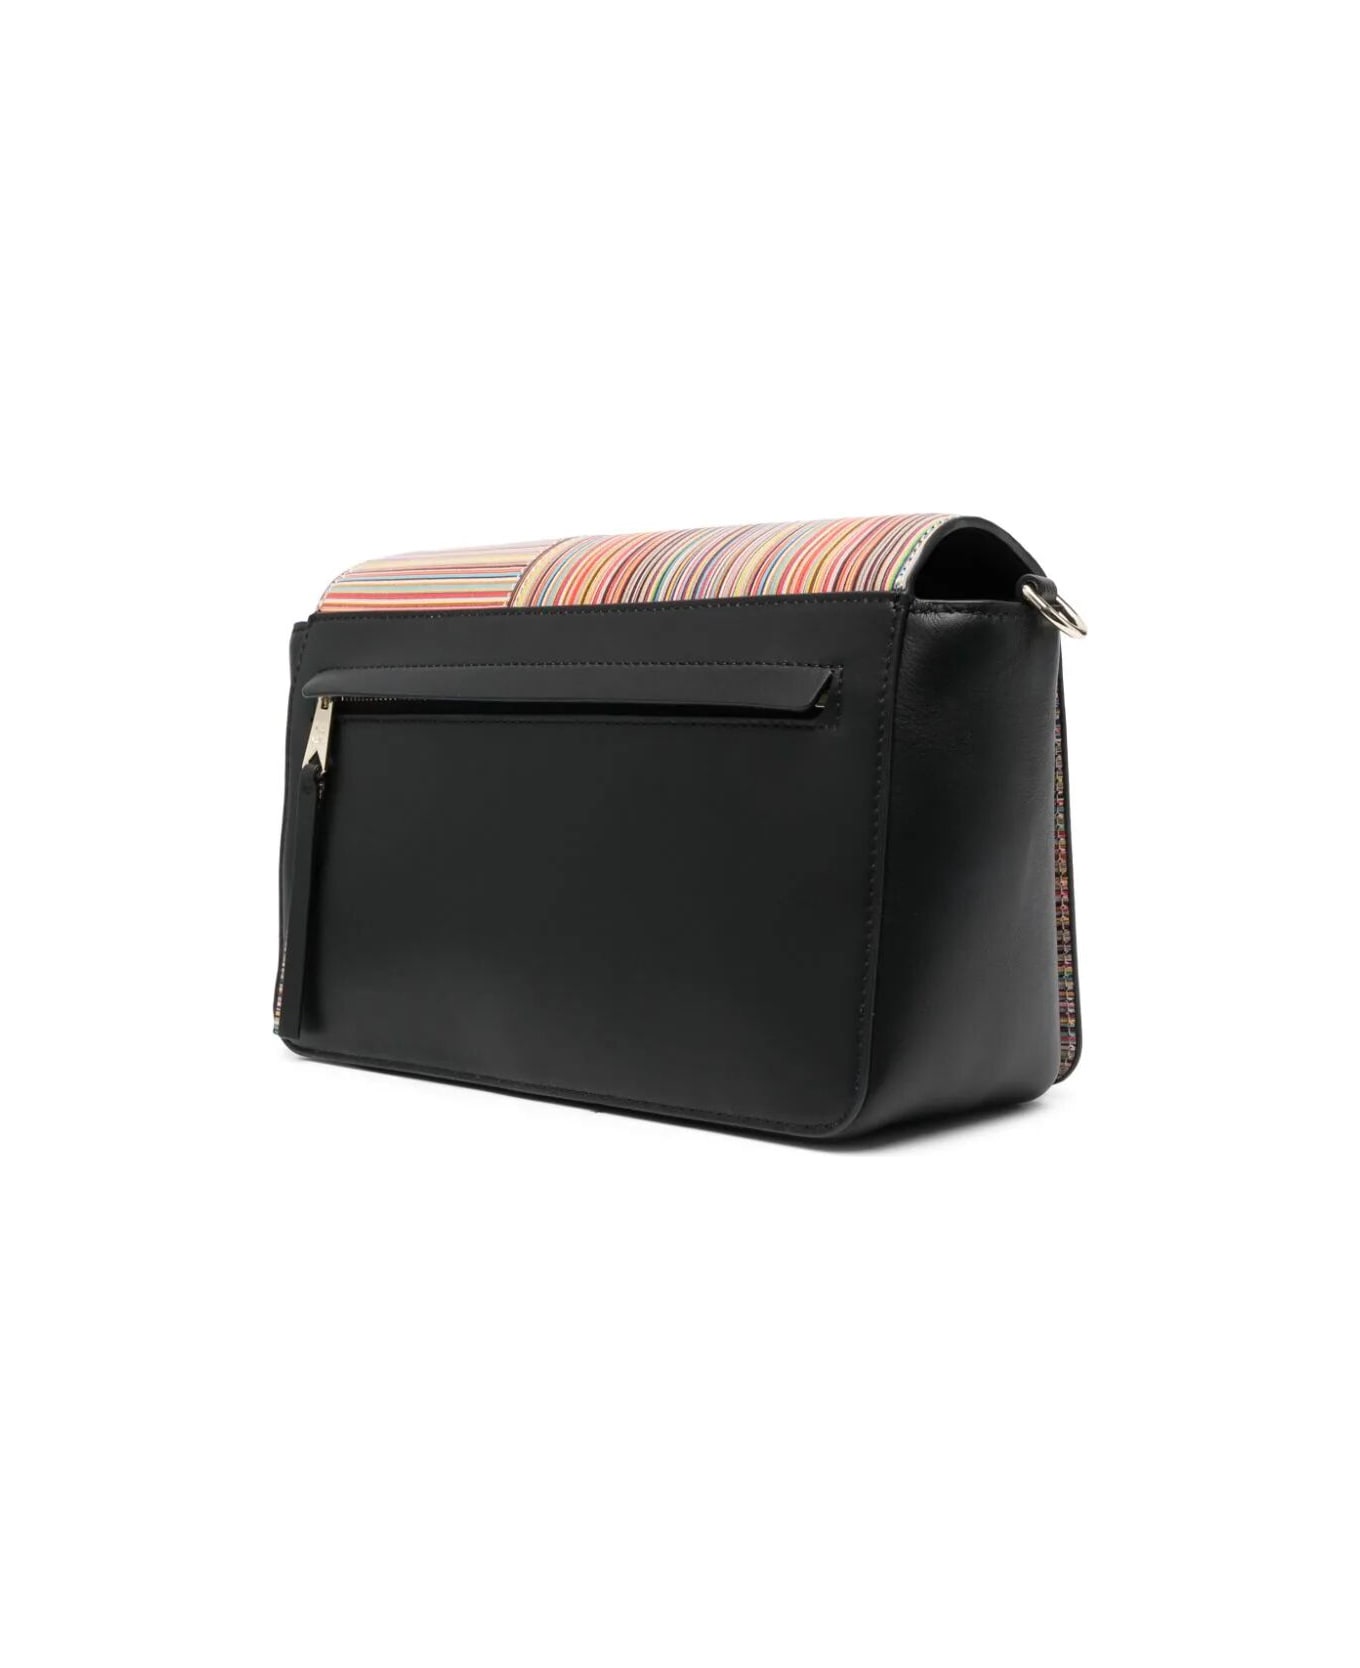 PS by Paul Smith Bag Flap Xbody - Multi ショルダーバッグ